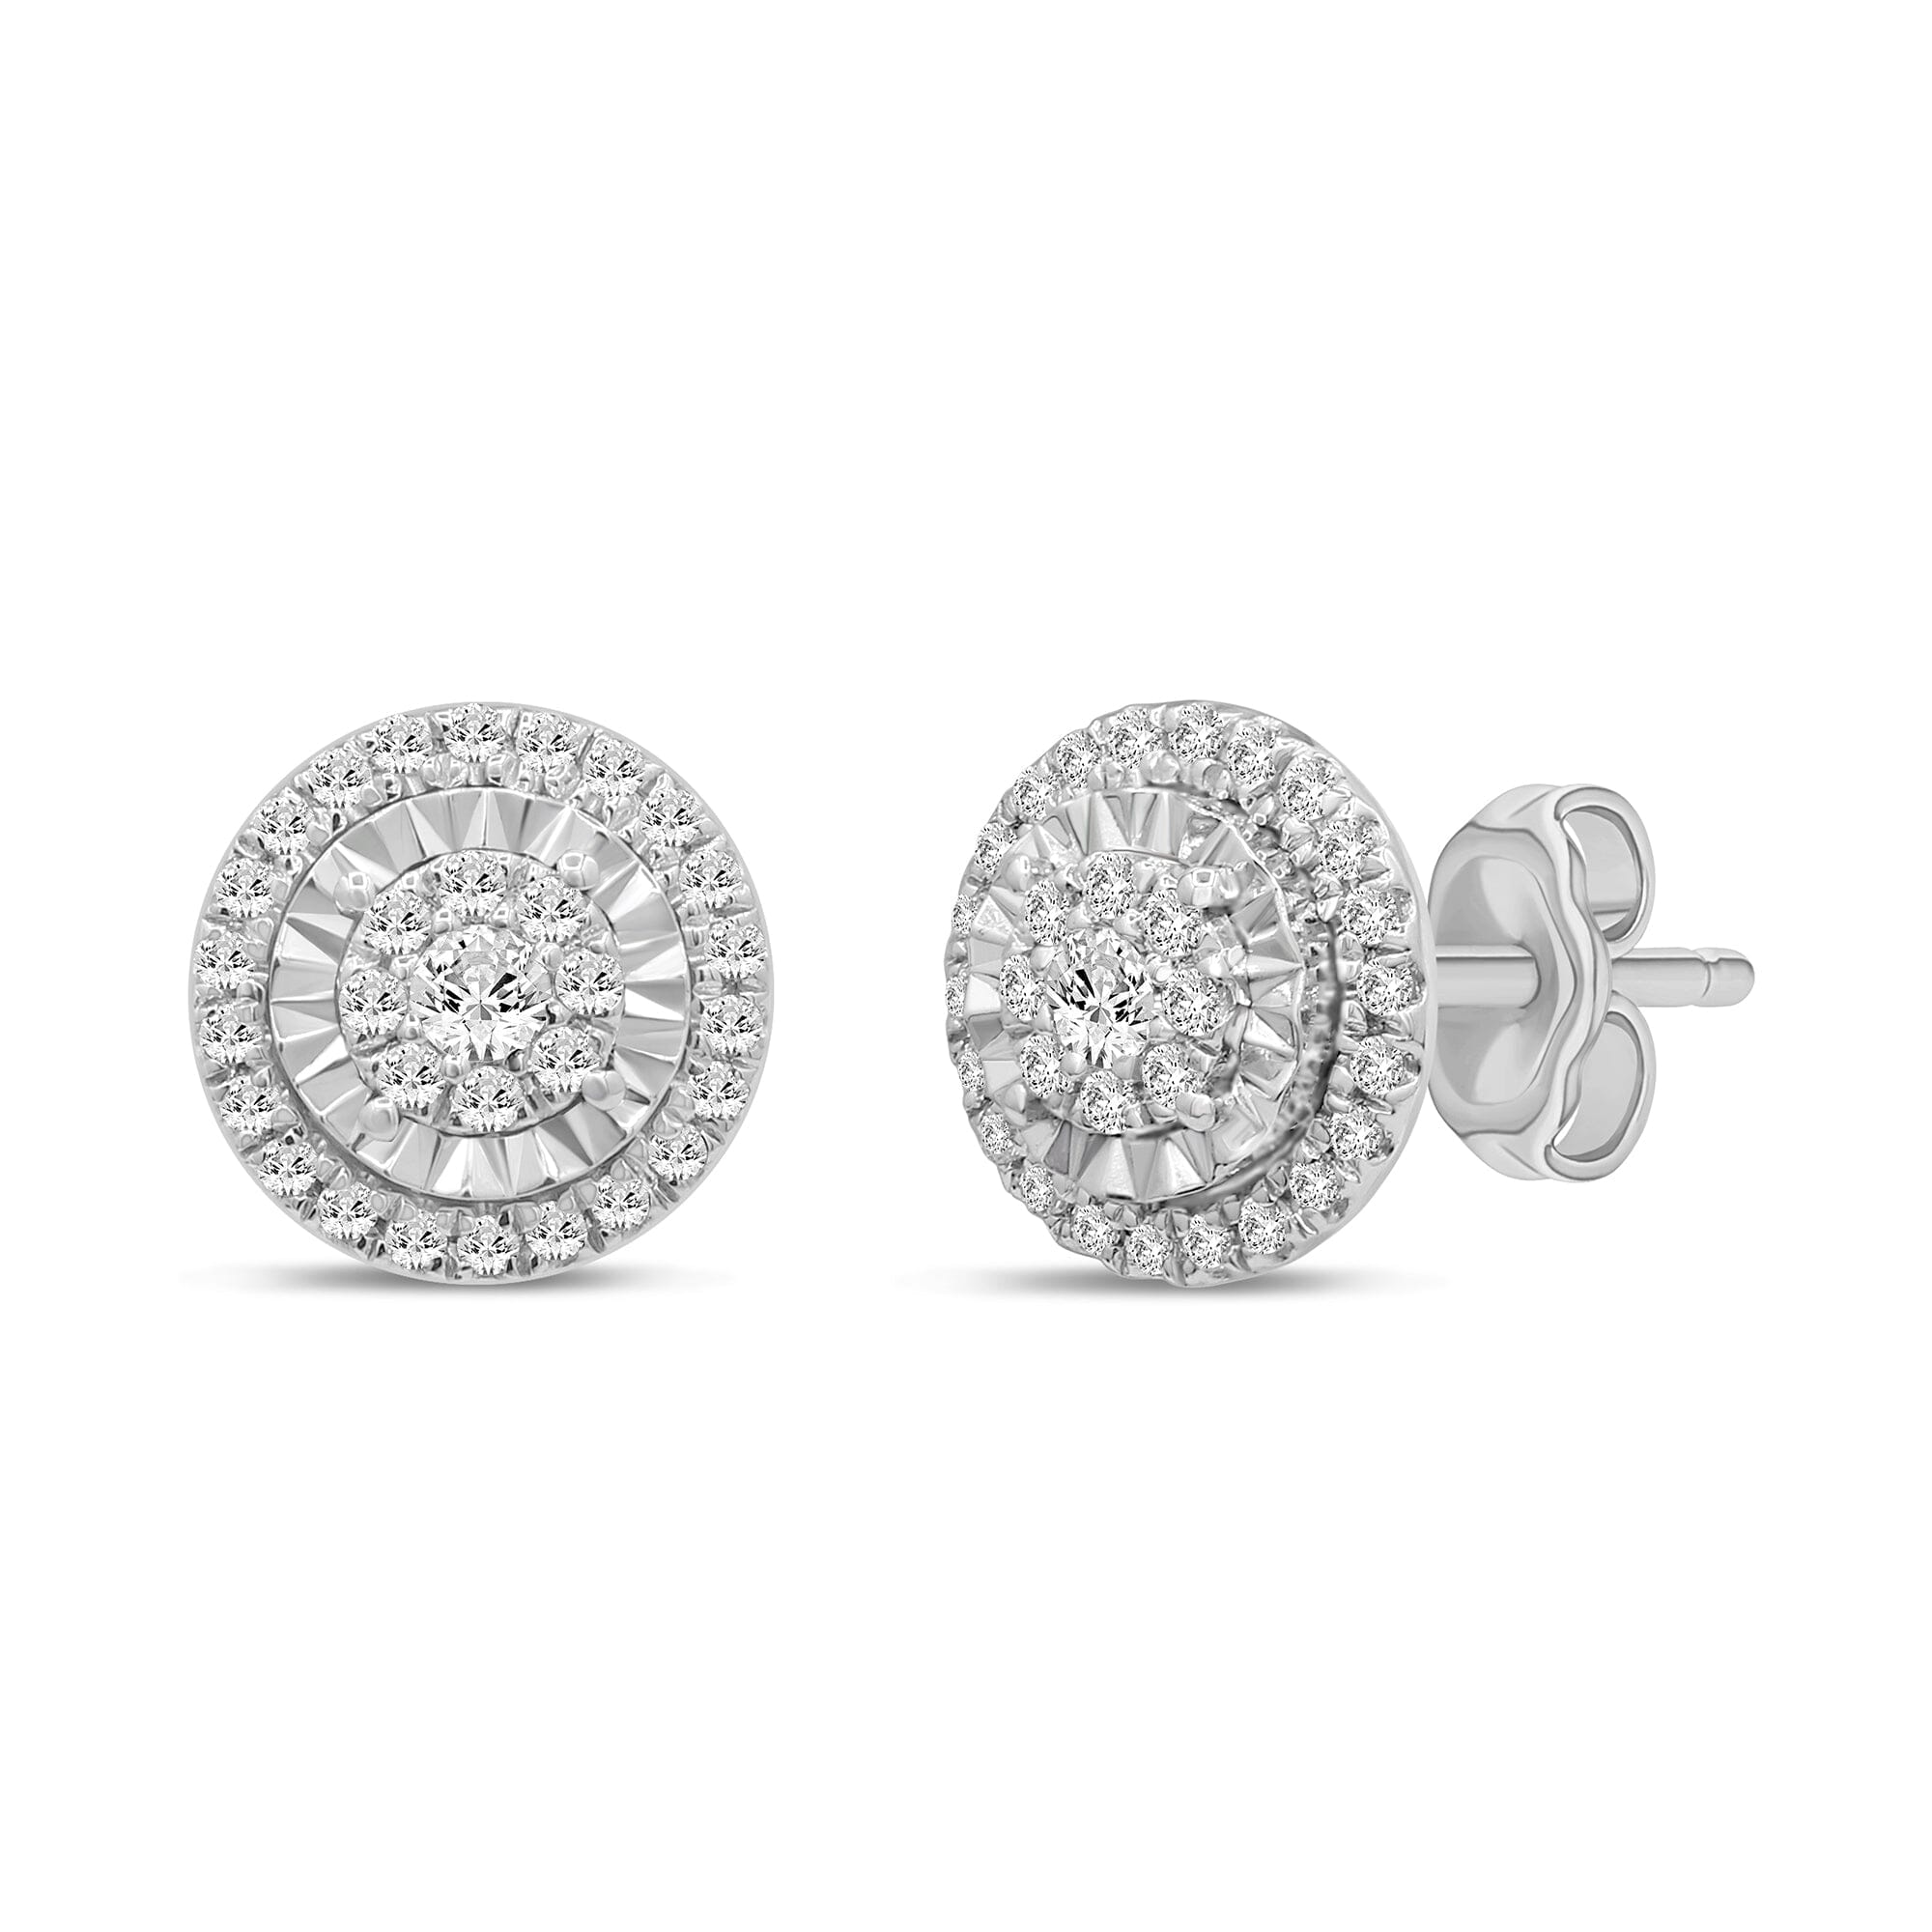 Halo Stud Earrings with 1/3ct of Diamonds in 9ct White Gold Earrings Bevilles 